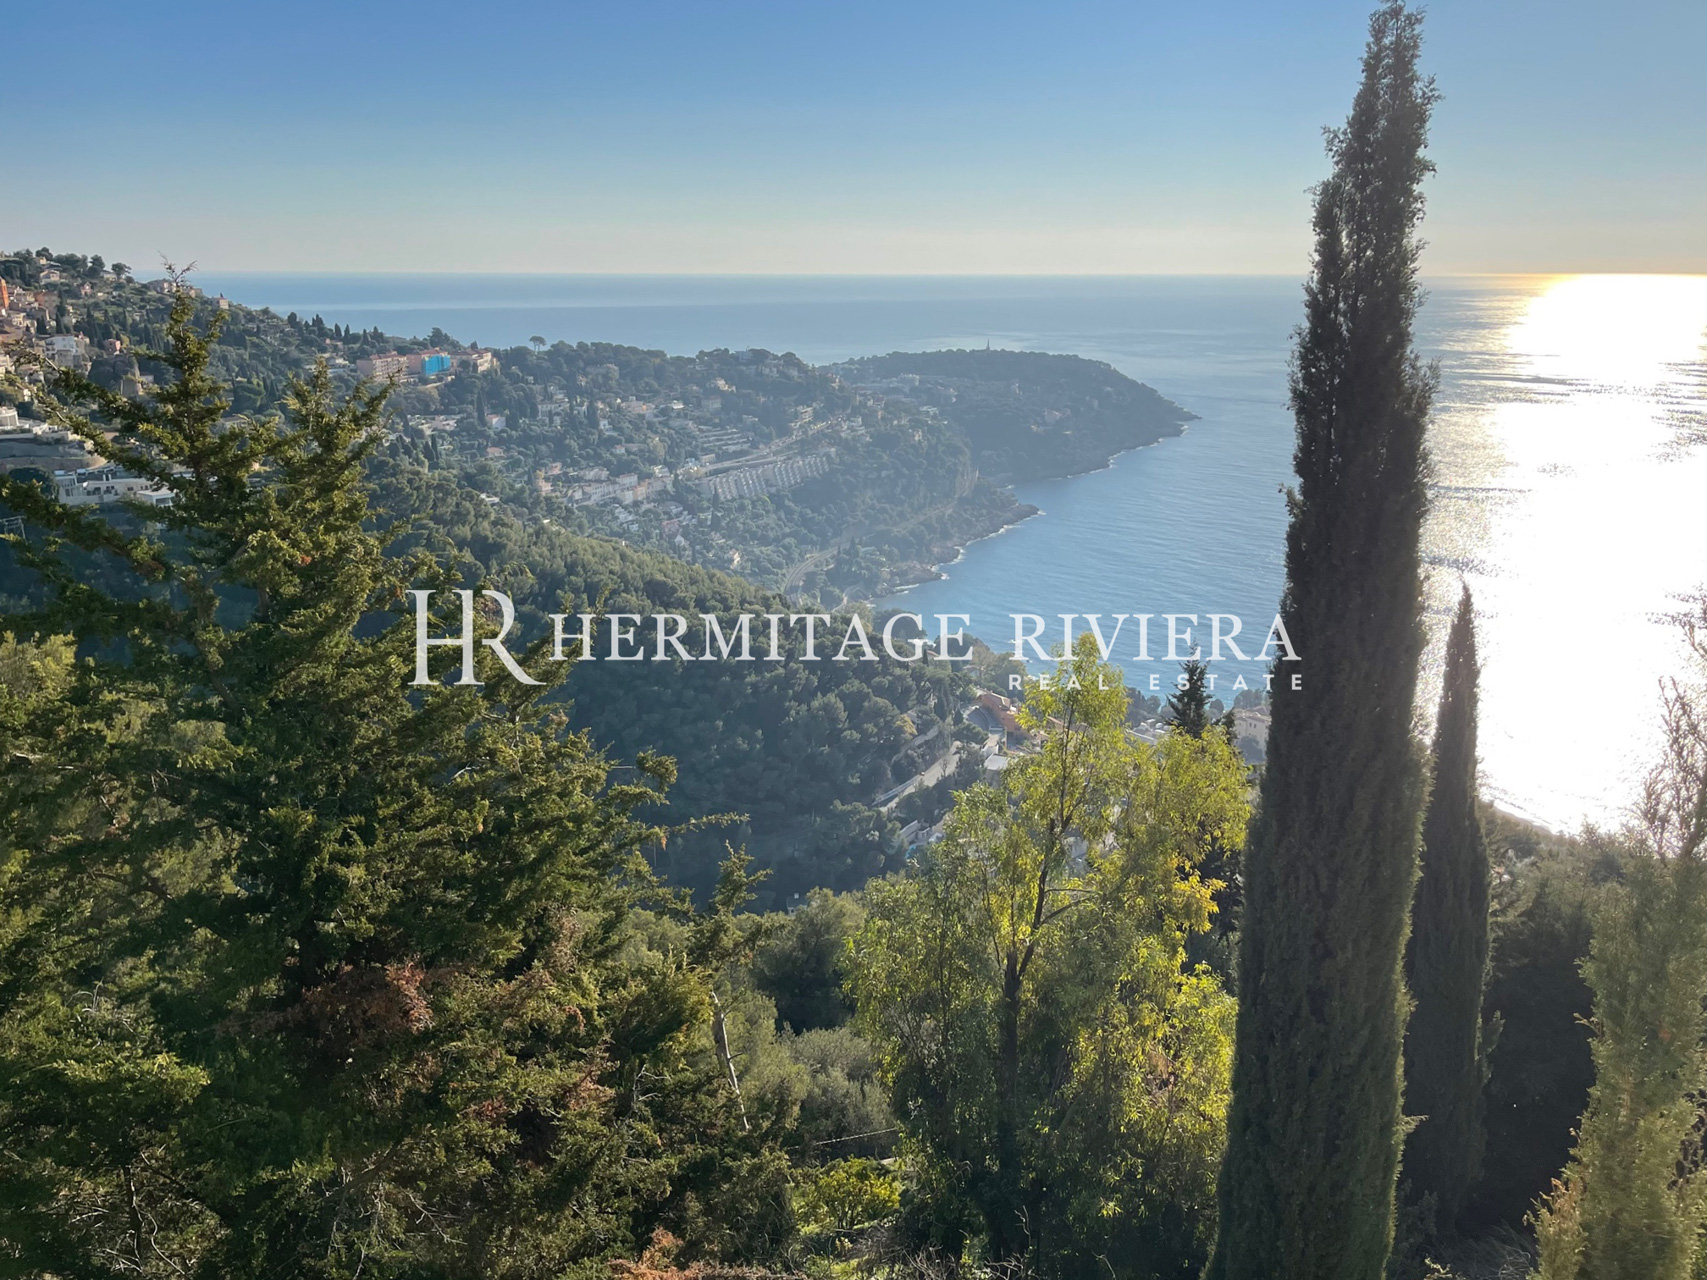 Property close Monaco with panoramic view  (image 2)